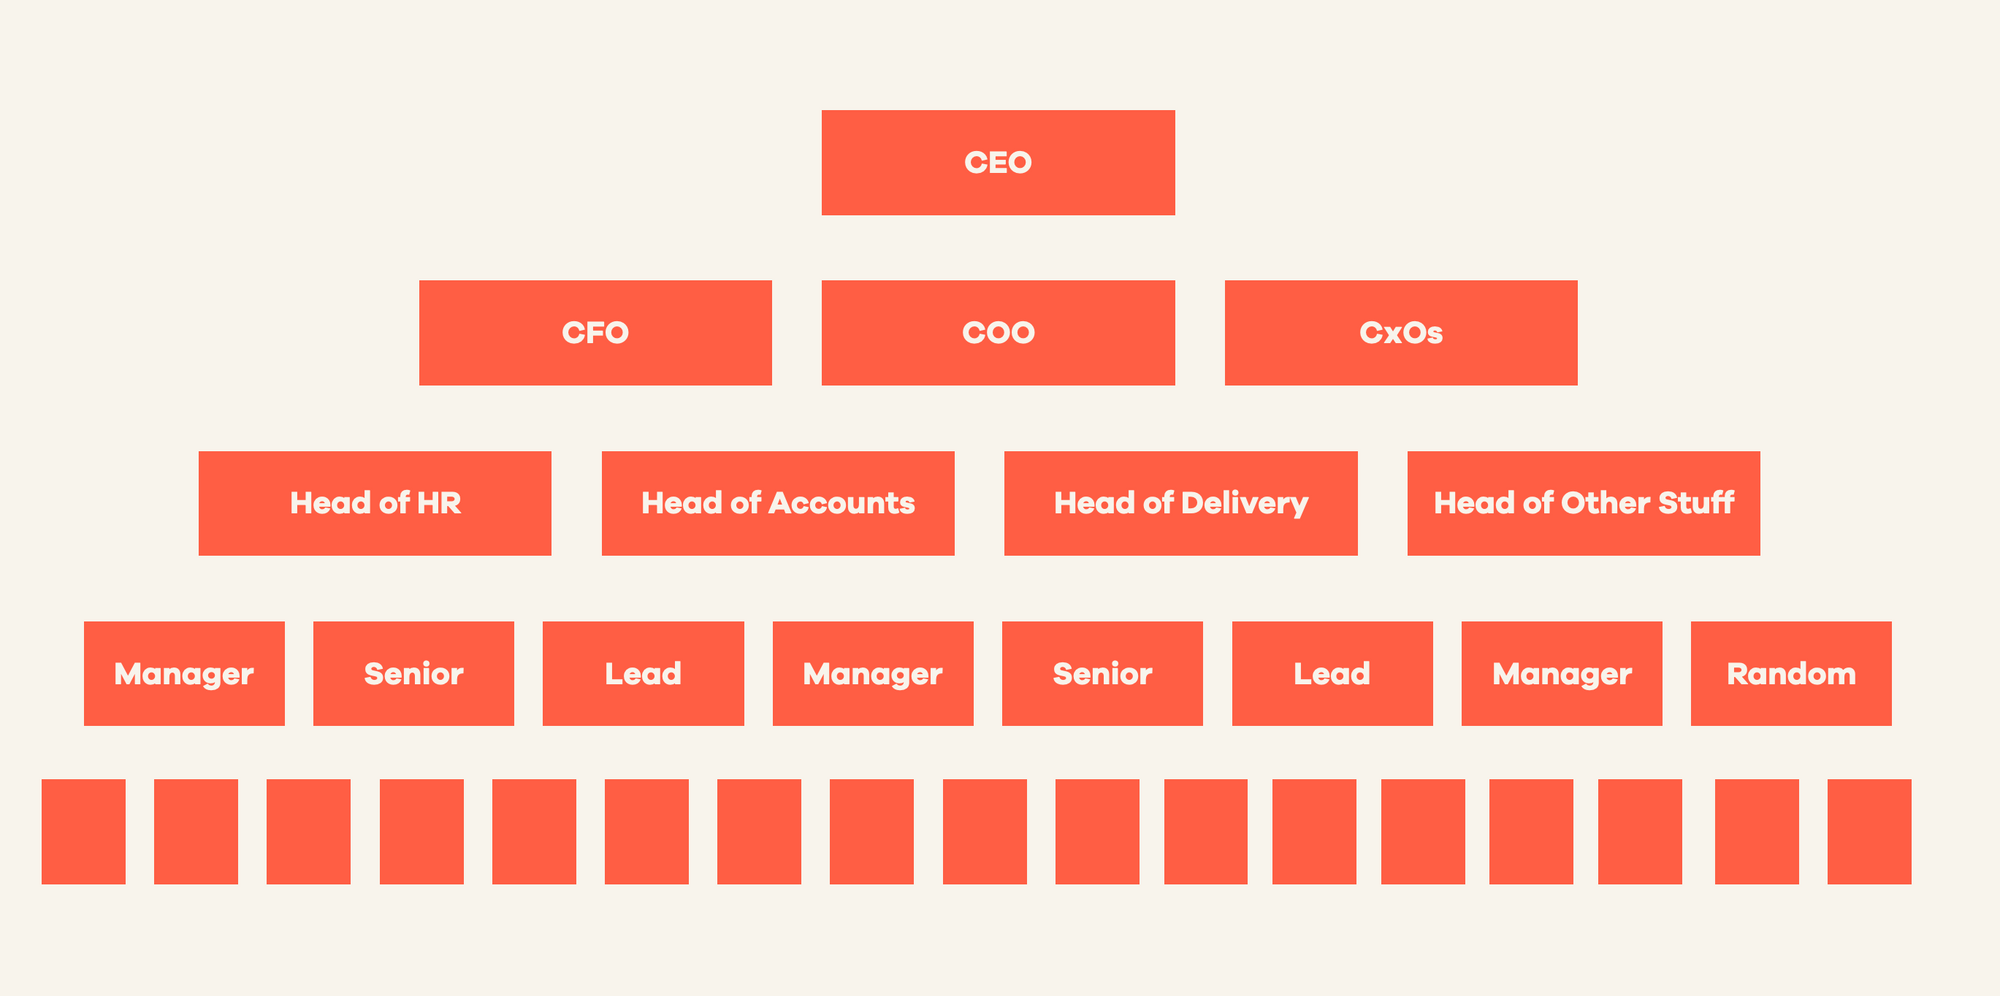 An old-school org chart with a CEO at the top and different layers below, formed into a triangle